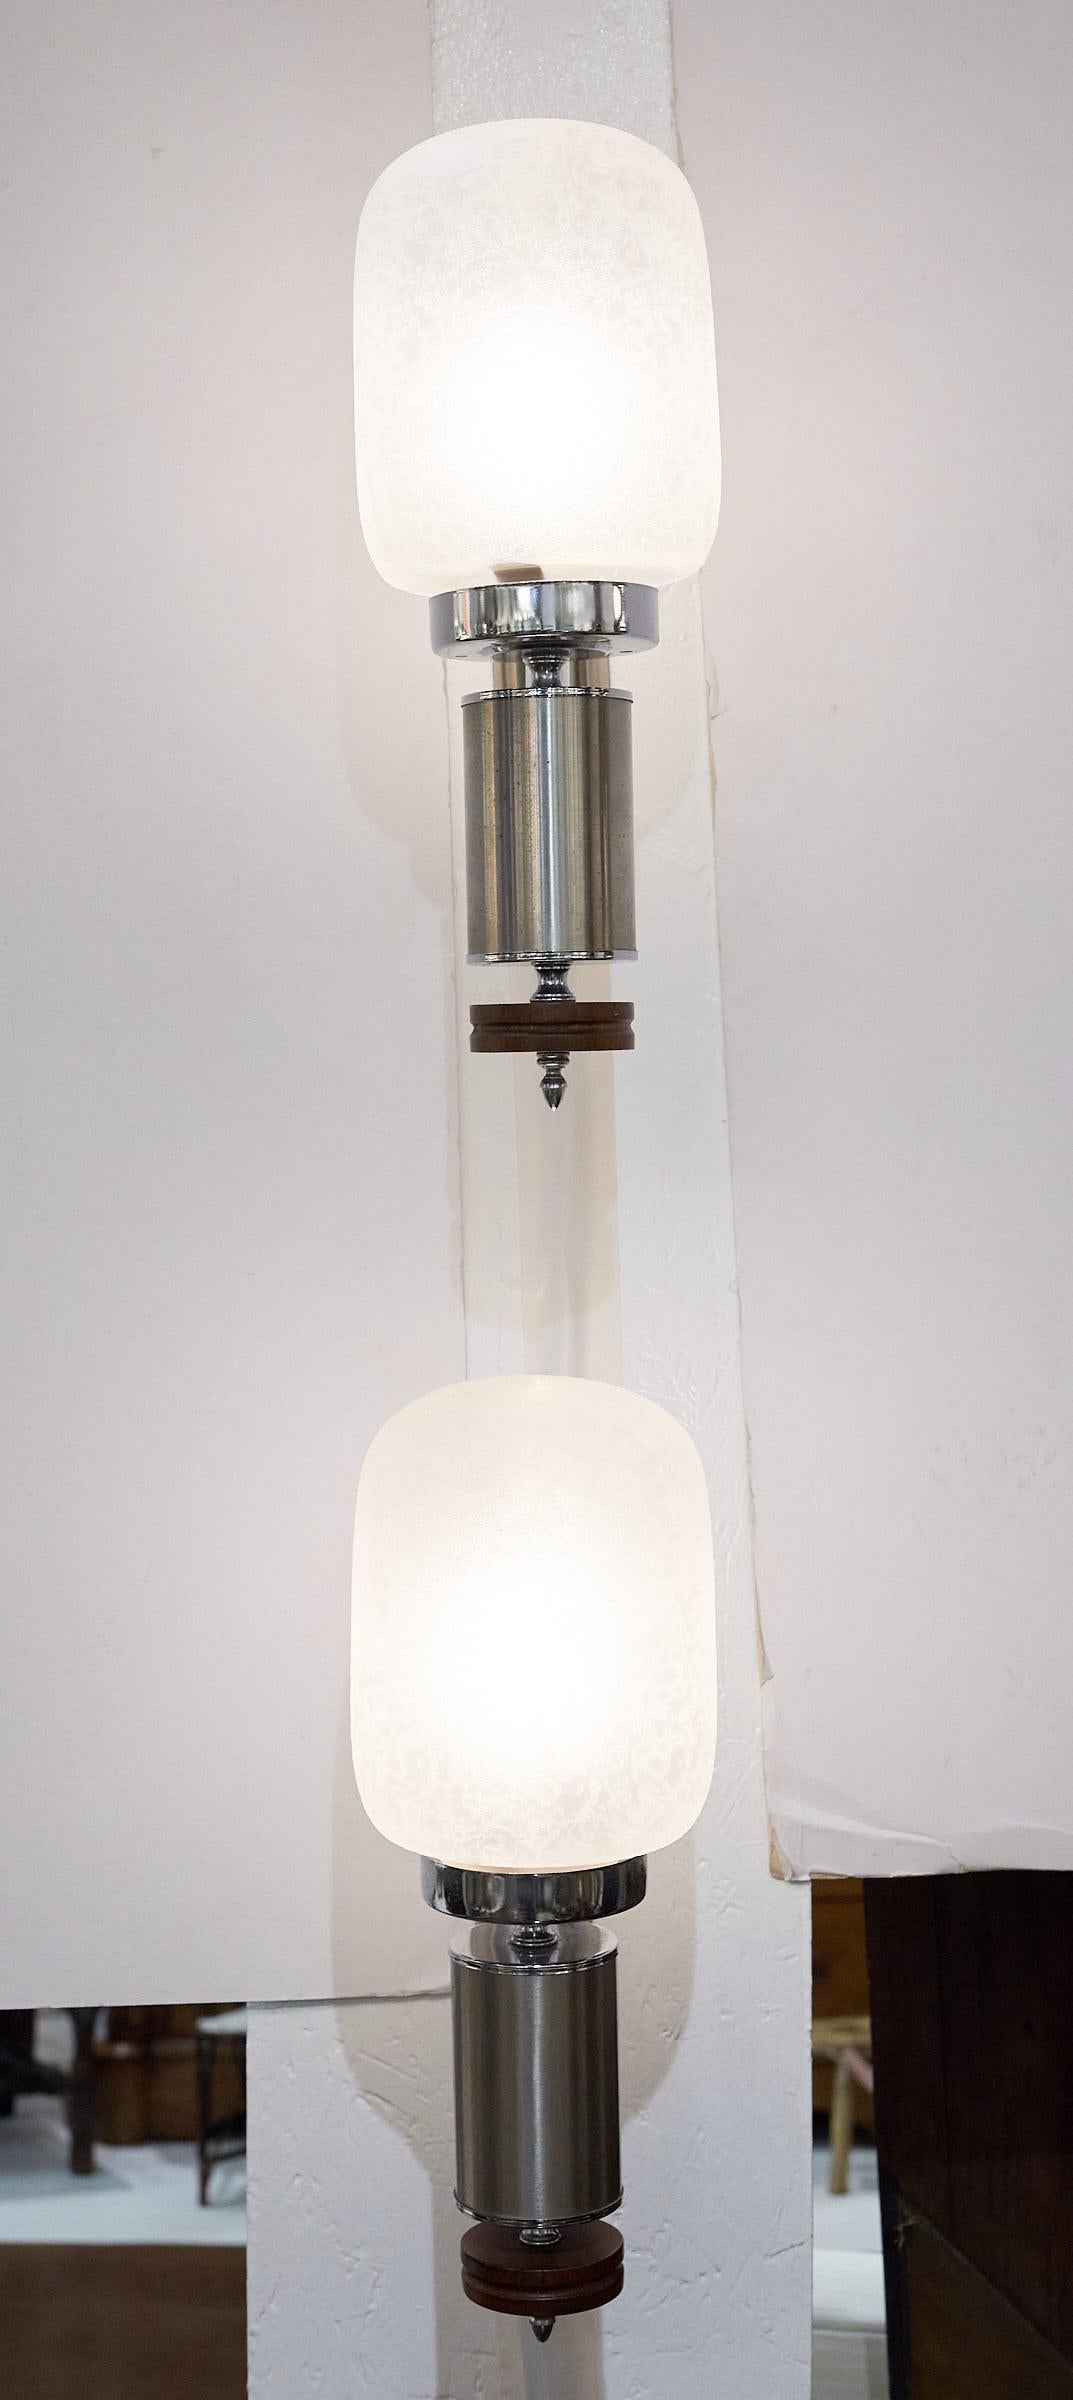 Great pair of oversized Italian sconces made in the 1970s and designed in the style of Mid-Century Modern. A large frosted glass capsule shade rests on a chrome cylinder with a turned walnut accent and chrome finial at its base. The light is held by